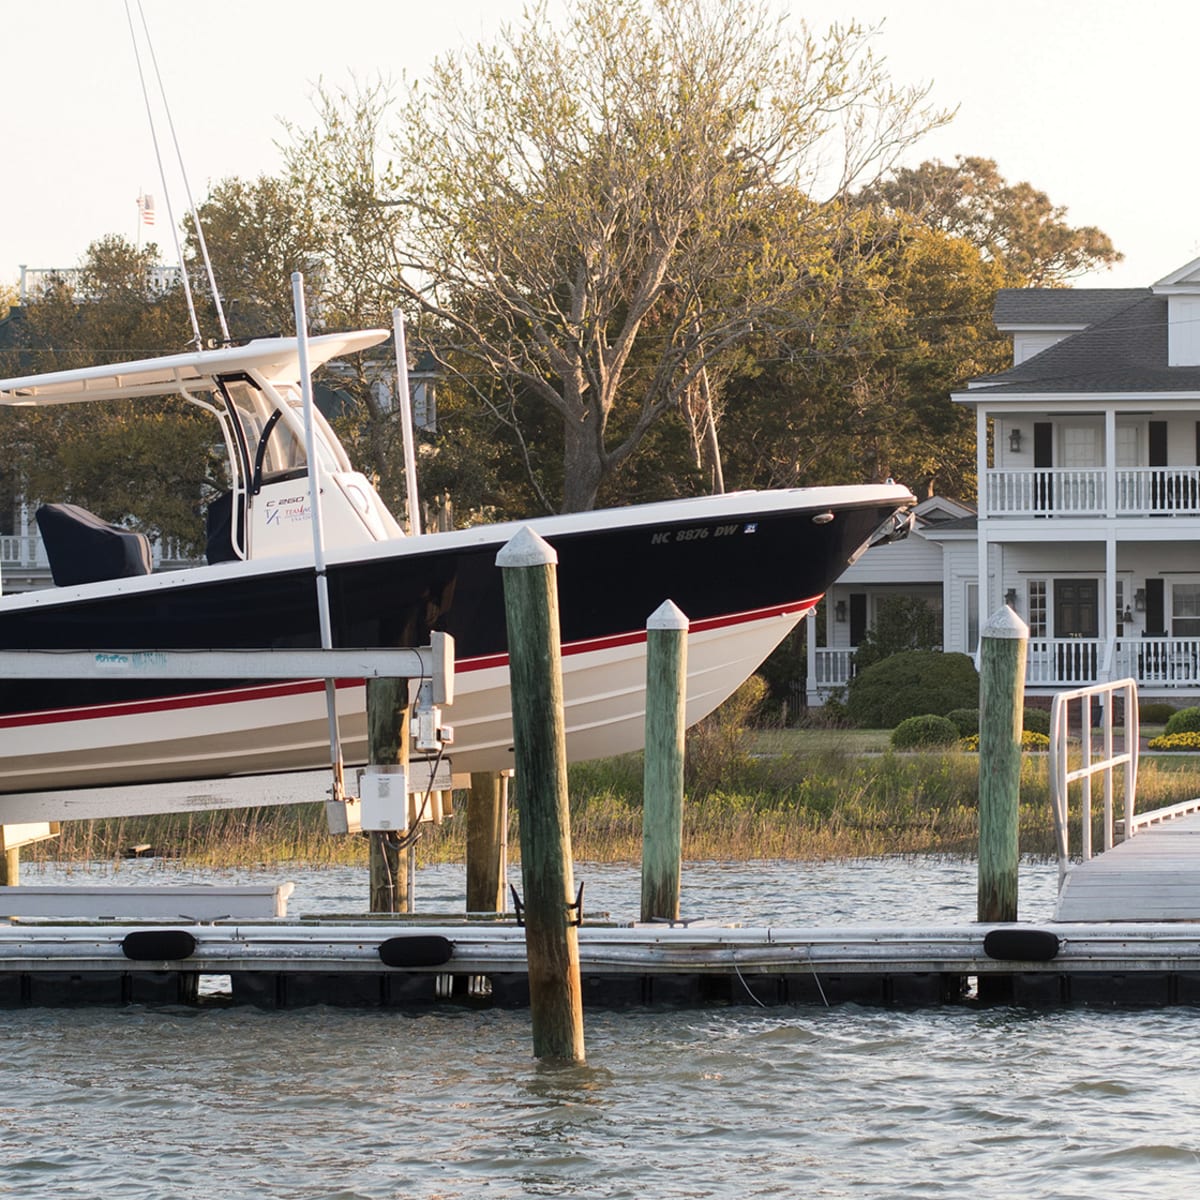 A boat lift is a device that allows boats to be raised and lowered